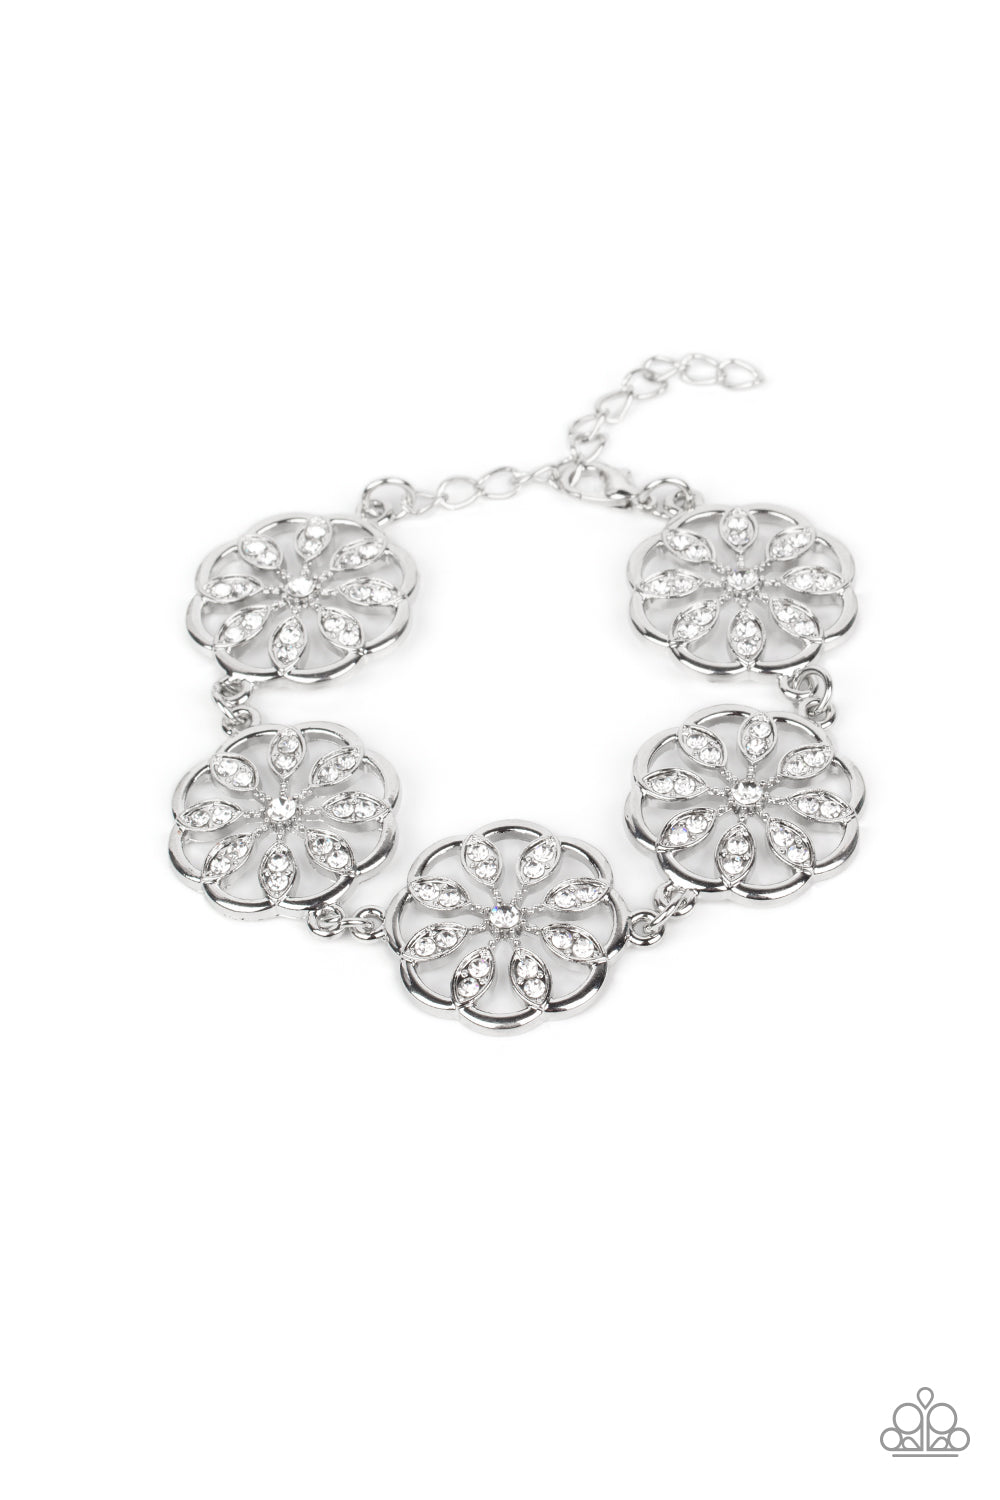 Blooming Bling - White Rhinestone Floral - Sparkly Silver Bracelet - Paparazzi Accessories - White rhinestone floral accents, scalloped silver frames delicately link around the wrist for a sparkly seasonal fashion. Features an adjustable clasp closure stylish bracelet.